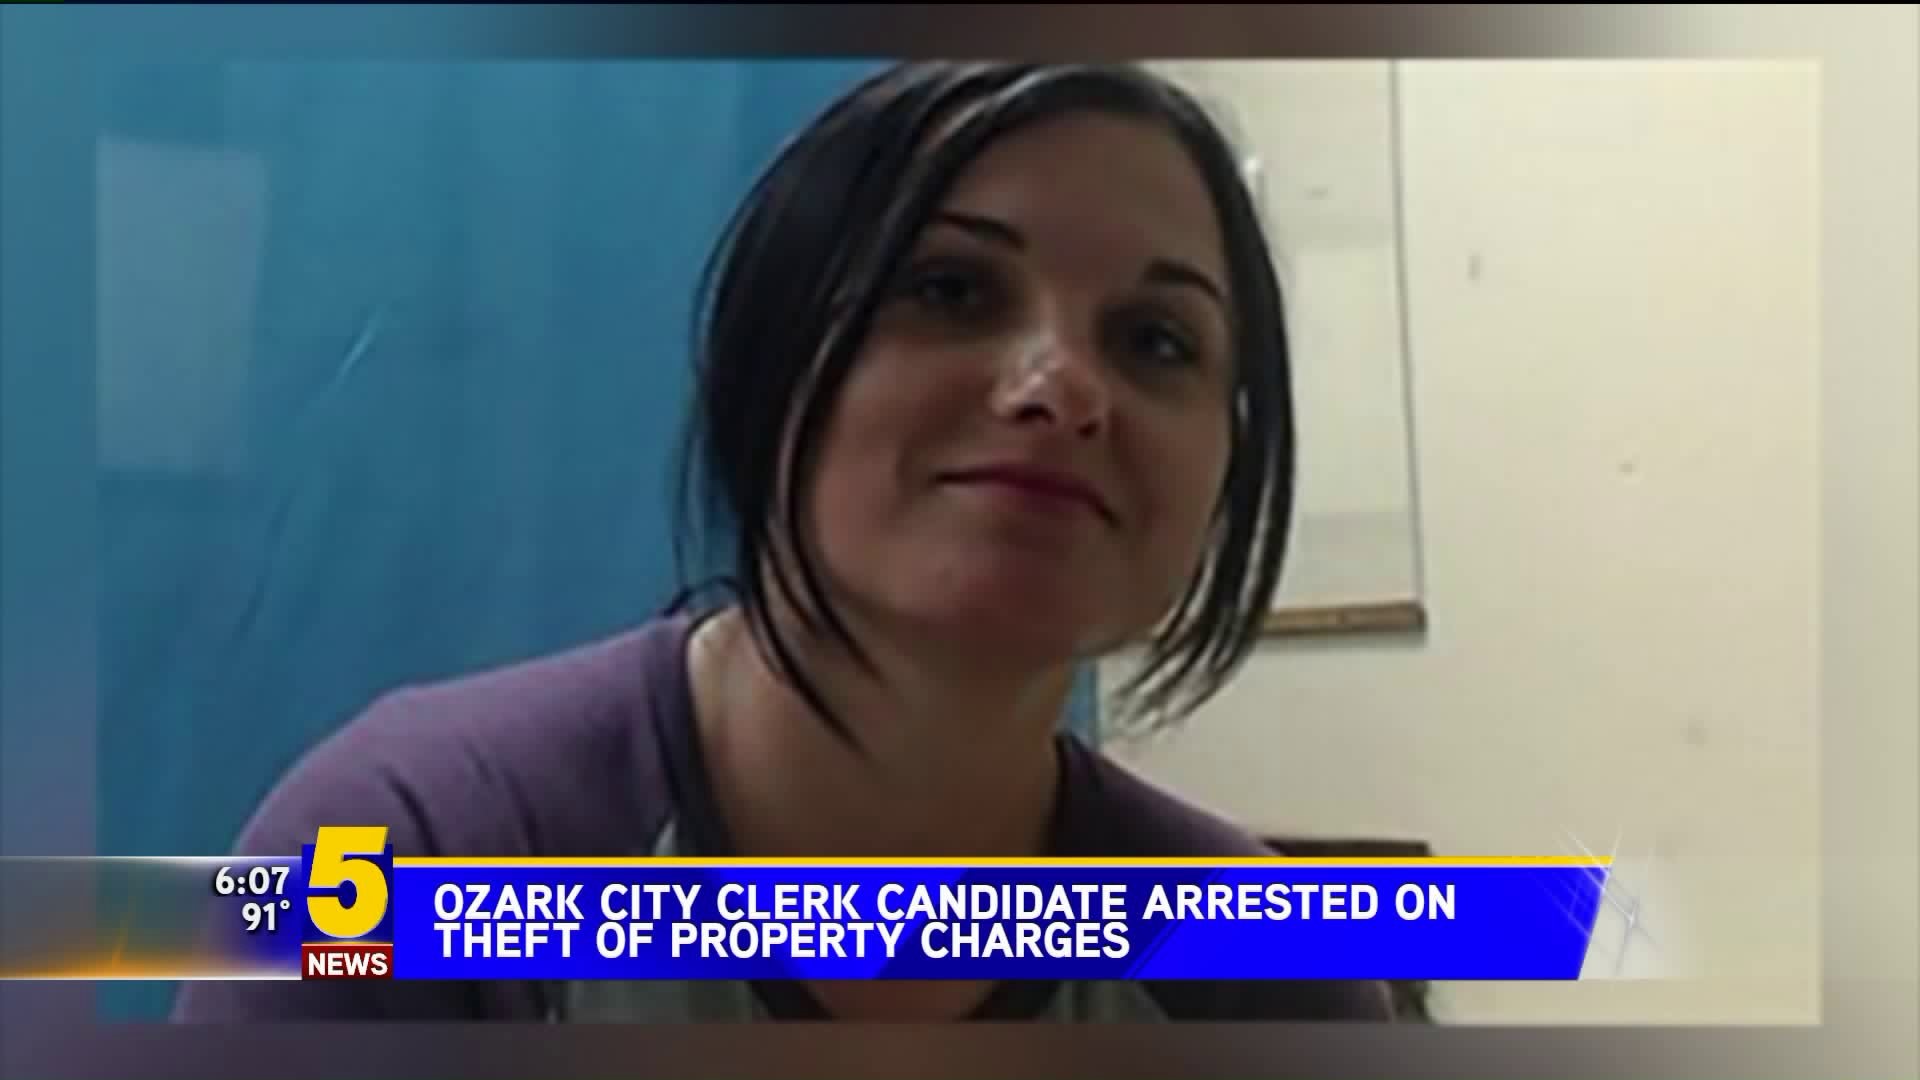 Ozark City Clerk Candidate Arrested On Theft Of Property Charges